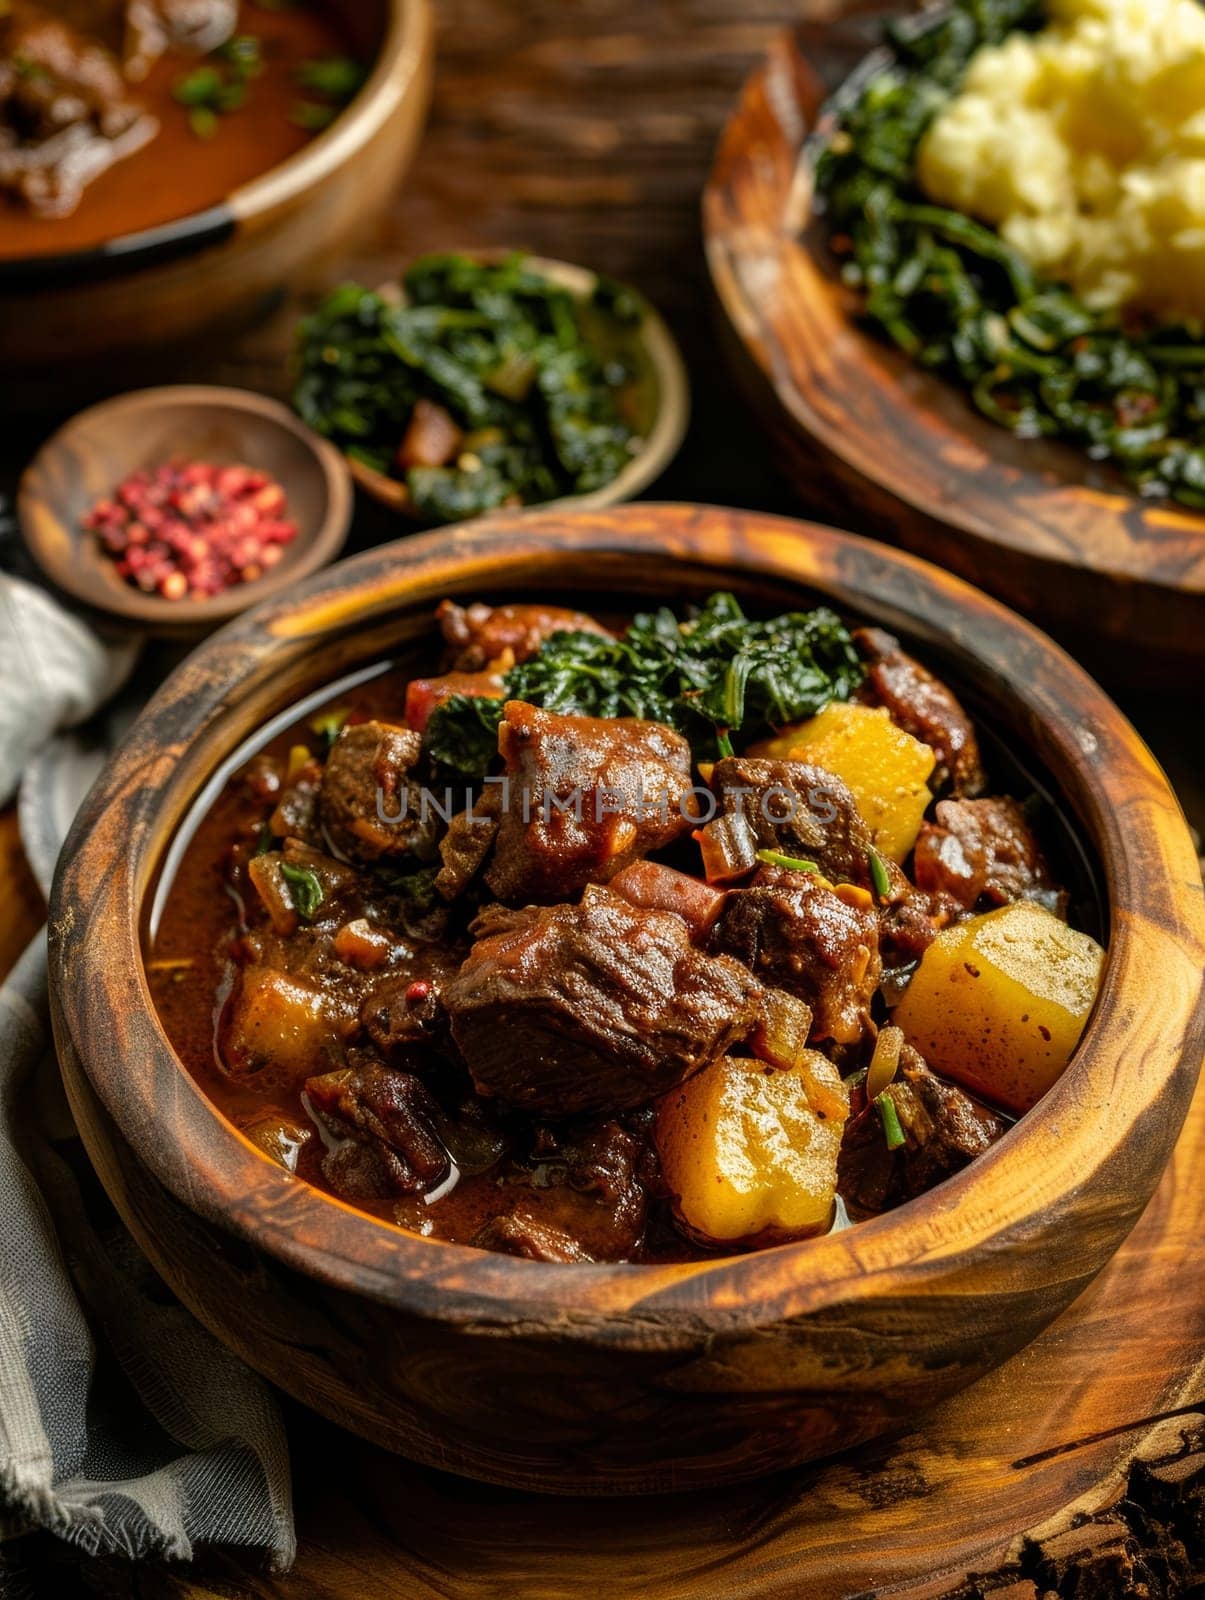 Zimbabwean sadza, a traditional cornmeal porridge, served in a wooden bowl with a side of greens and meat stew. This ethnic comfort food showcases the staple ingredients and homestyle cooking